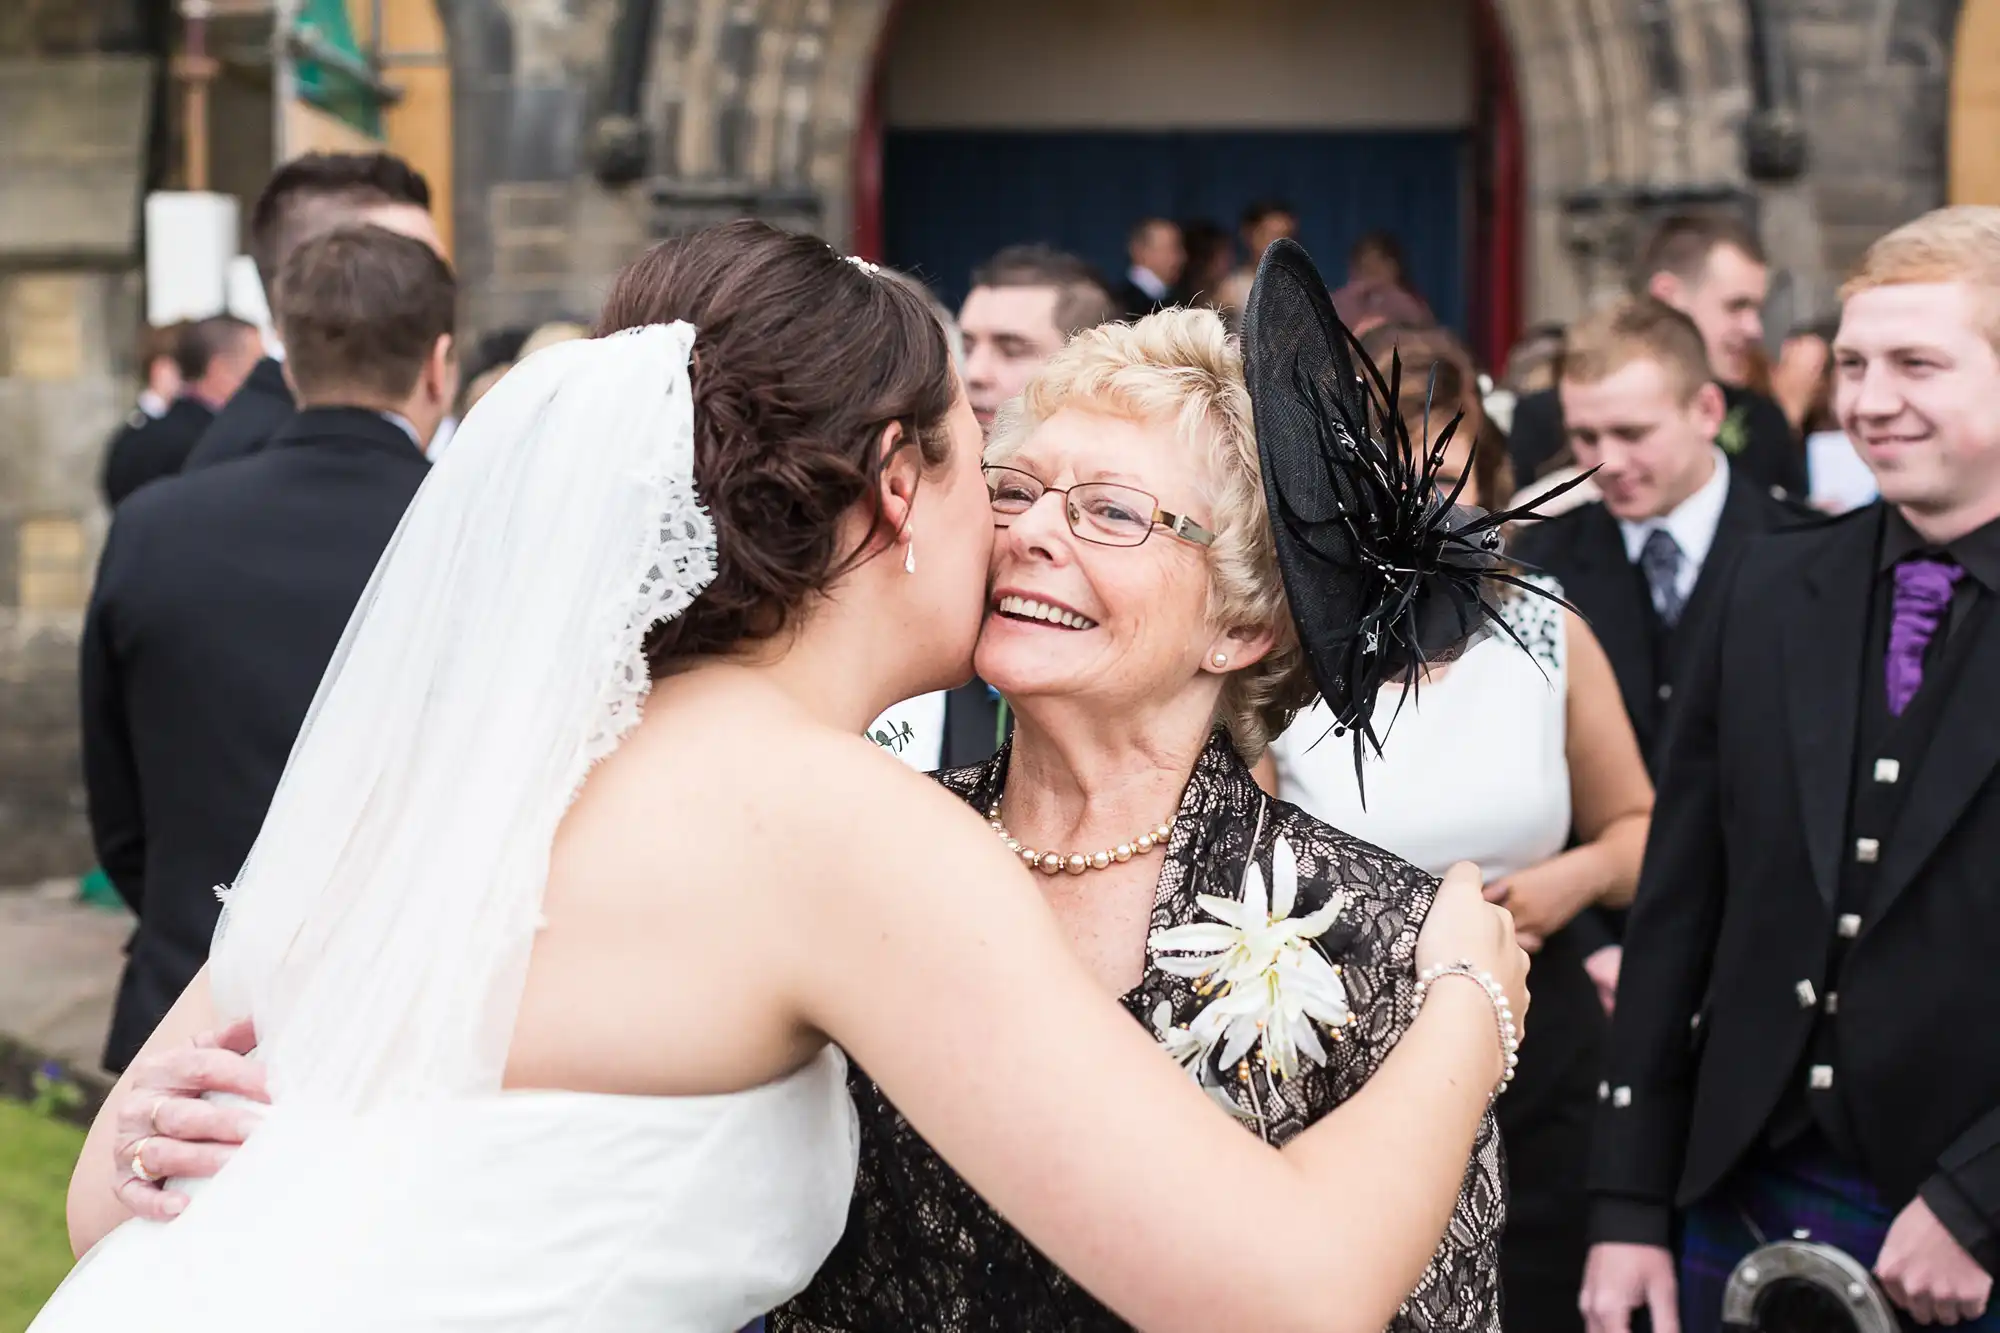 A bride in a white dress kisses an elderly woman wearing a black hat and floral dress outside a church, surrounded by wedding guests.